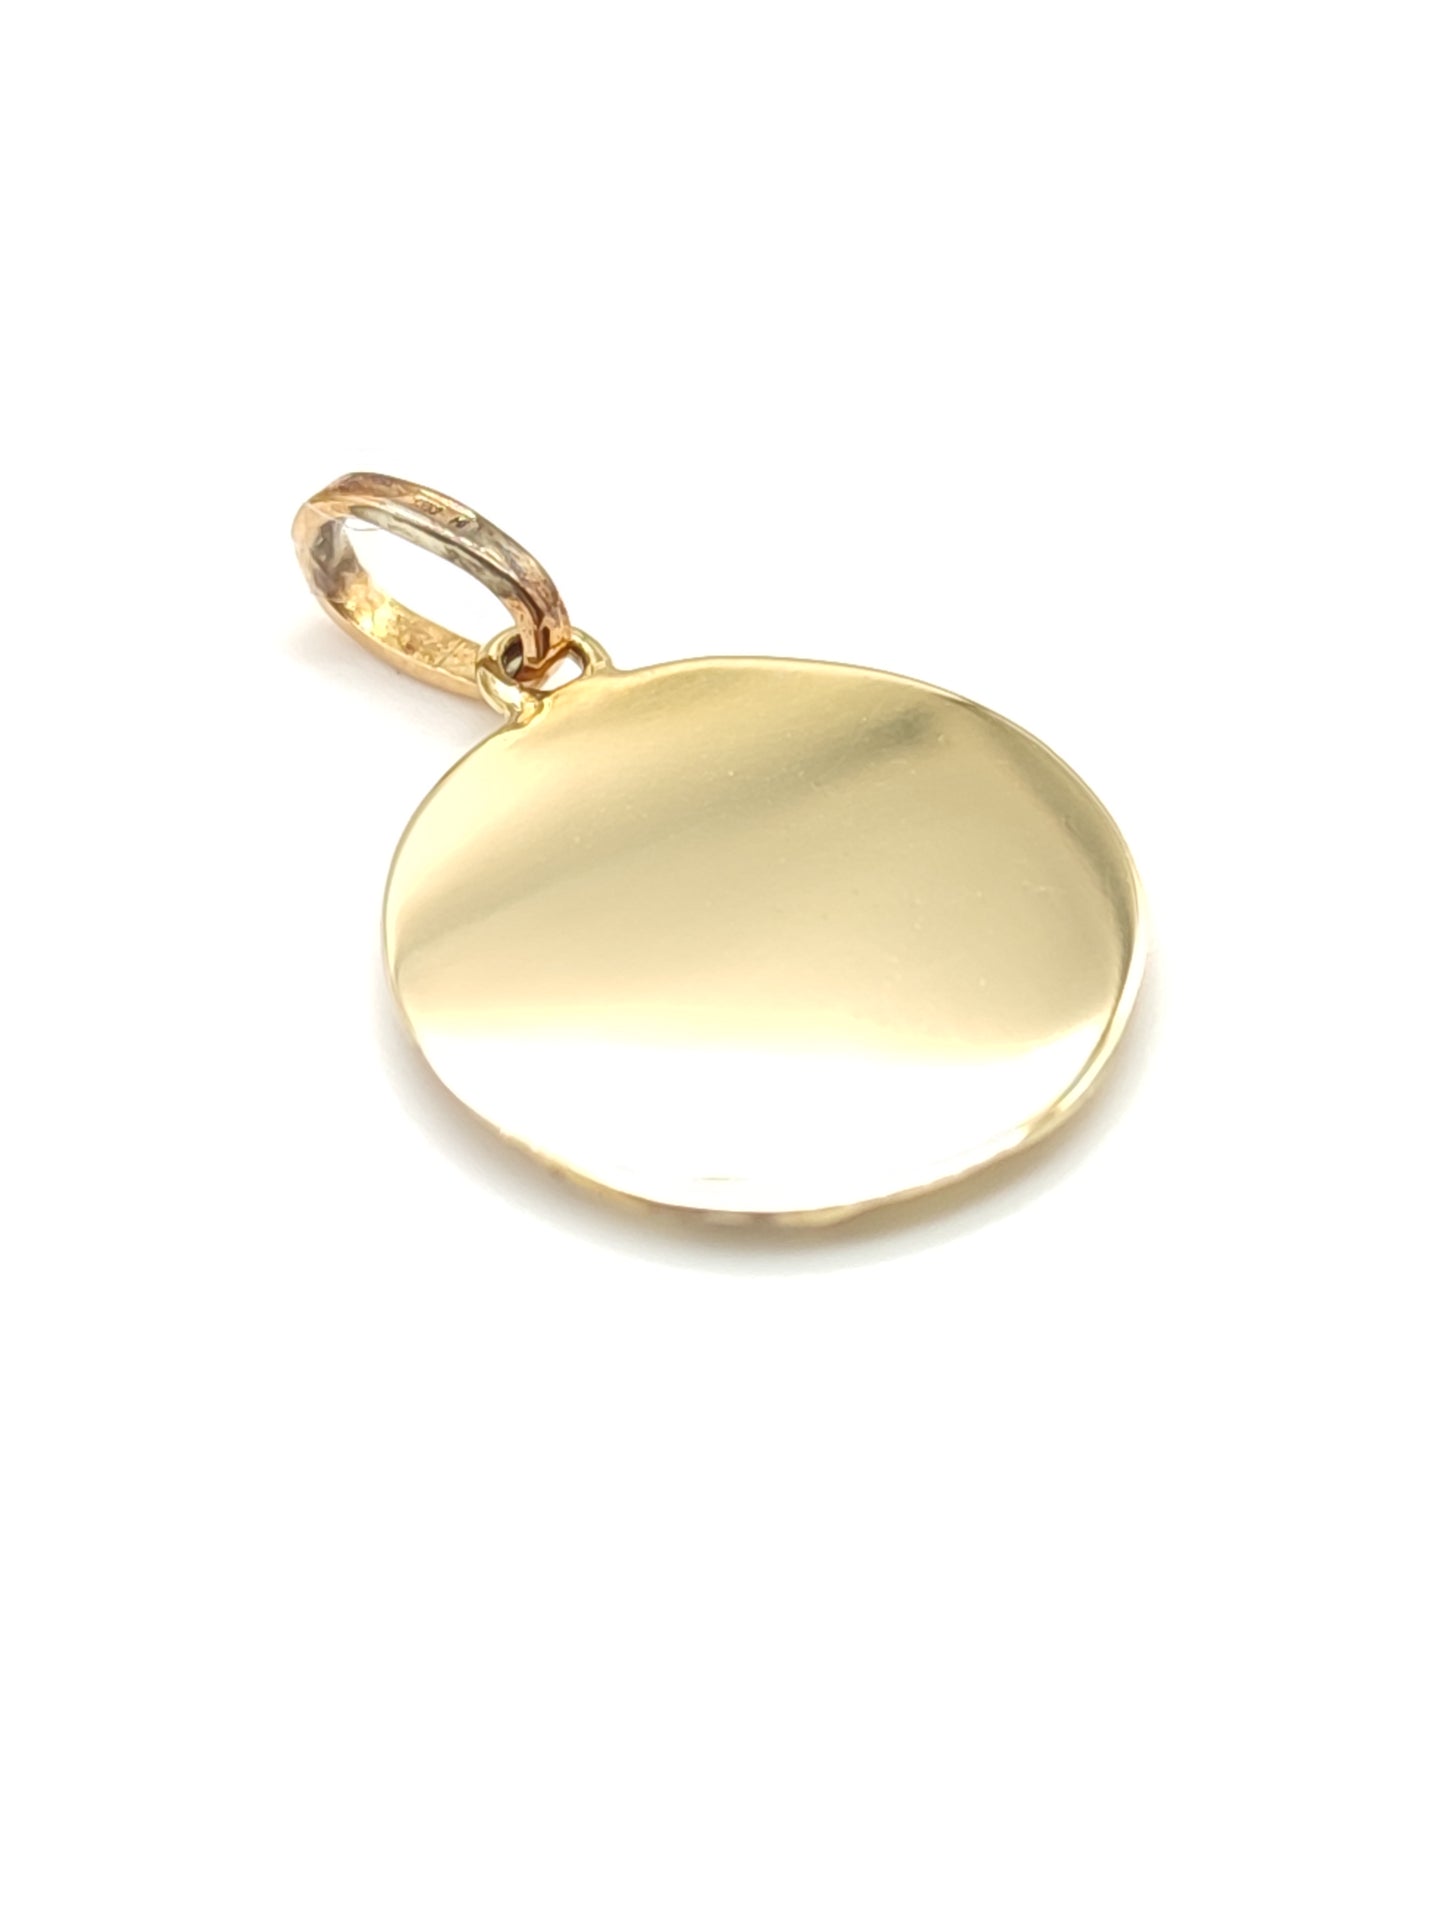 Madonna low relief gold pendant